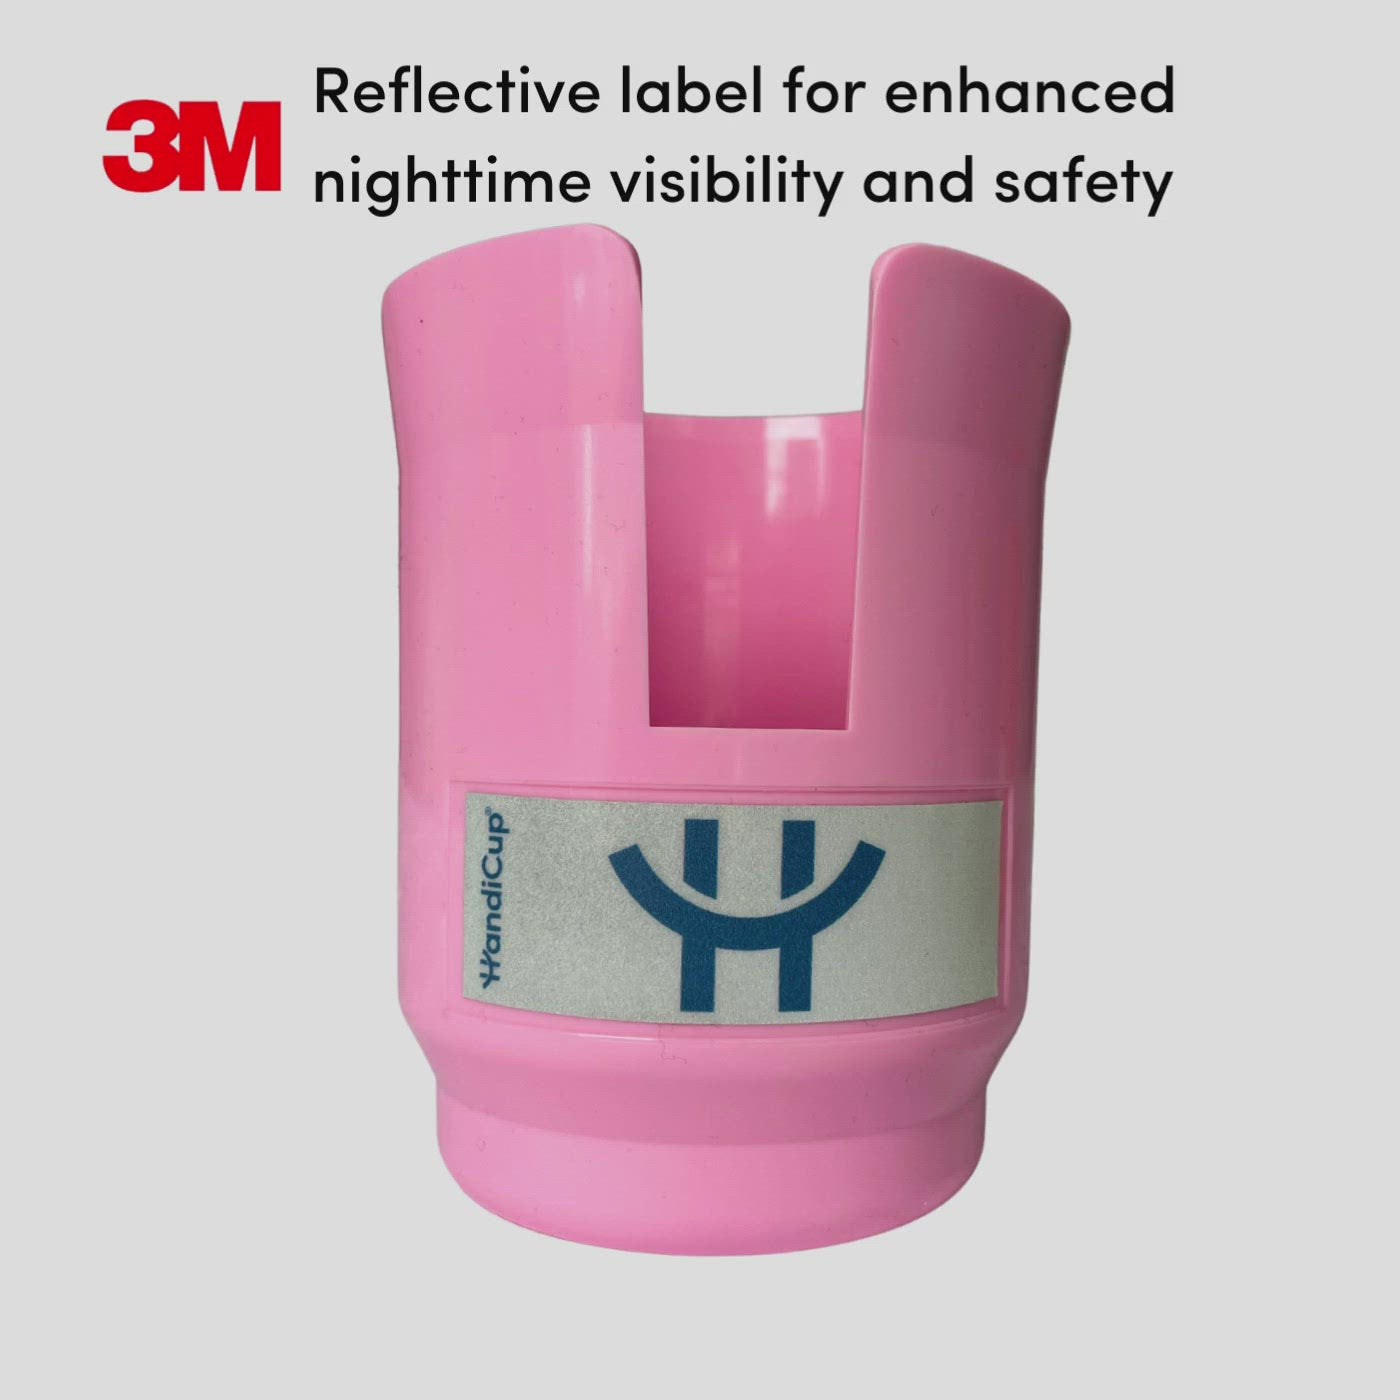 3m reflective label adds enhanced nighttime visibility and safety.